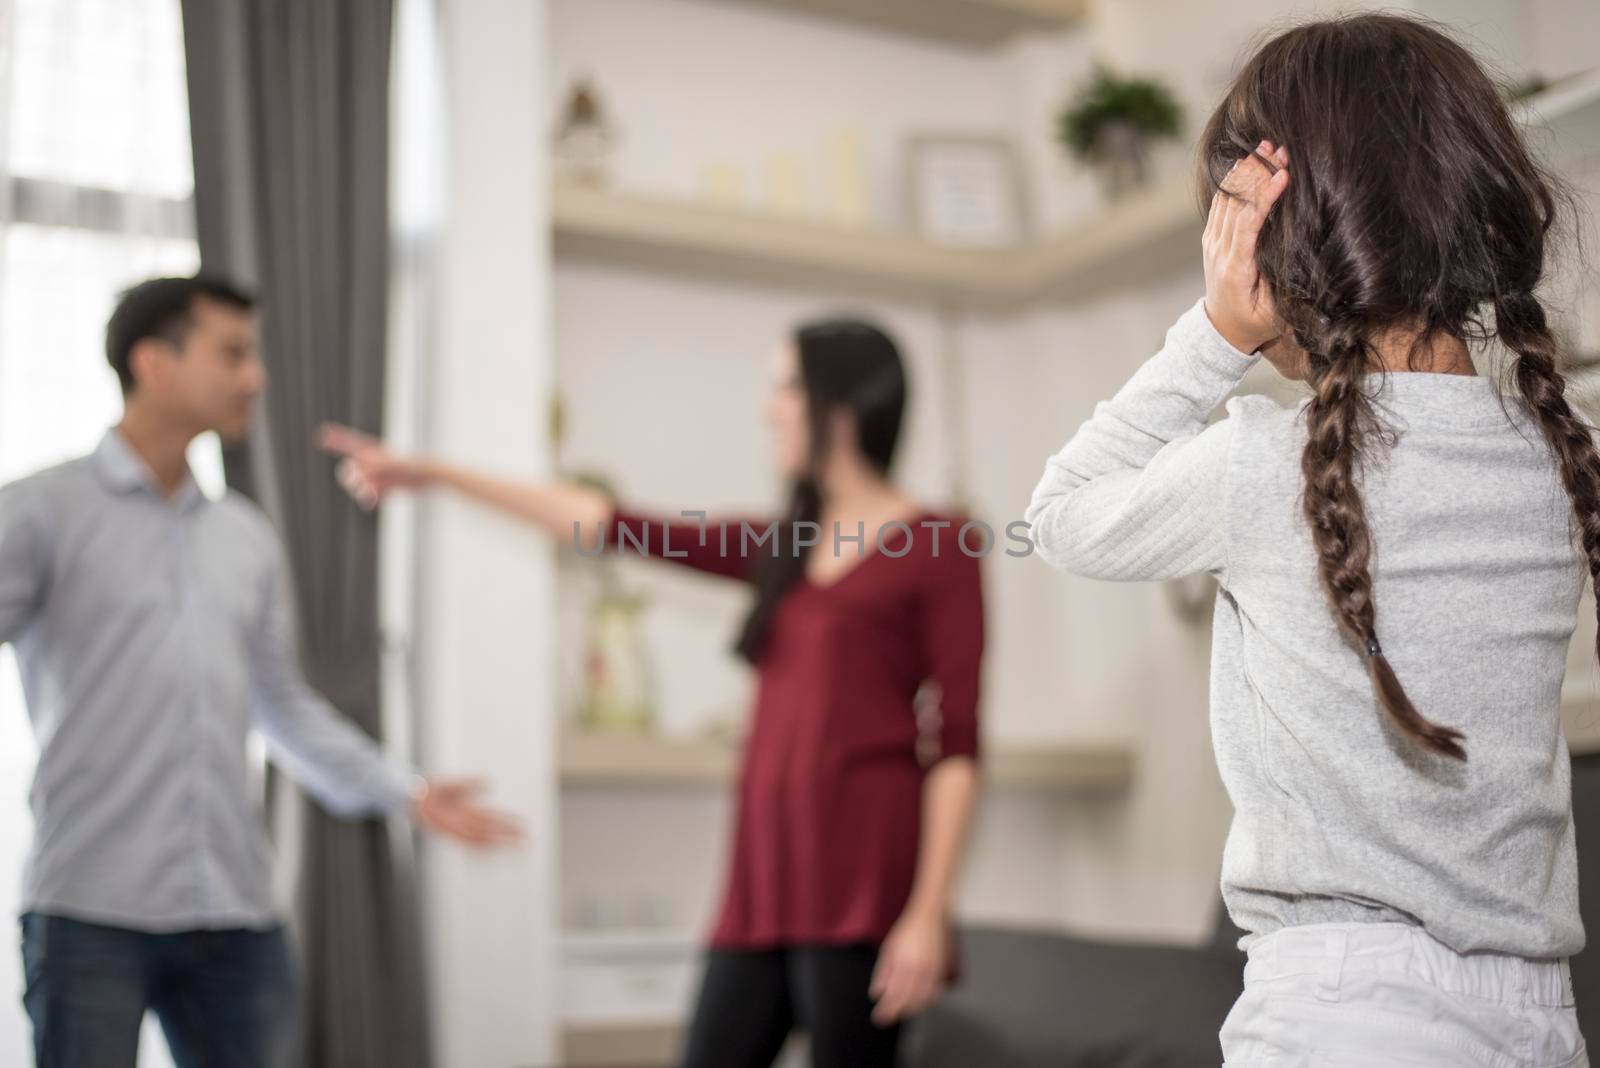 In back view, Little girl puts her hands on her ears because she does not want to hear her dad and mom quarrel. close ears, Family Dramatic scene, Parrents issues, Social and parents problem concept by MiniStocker